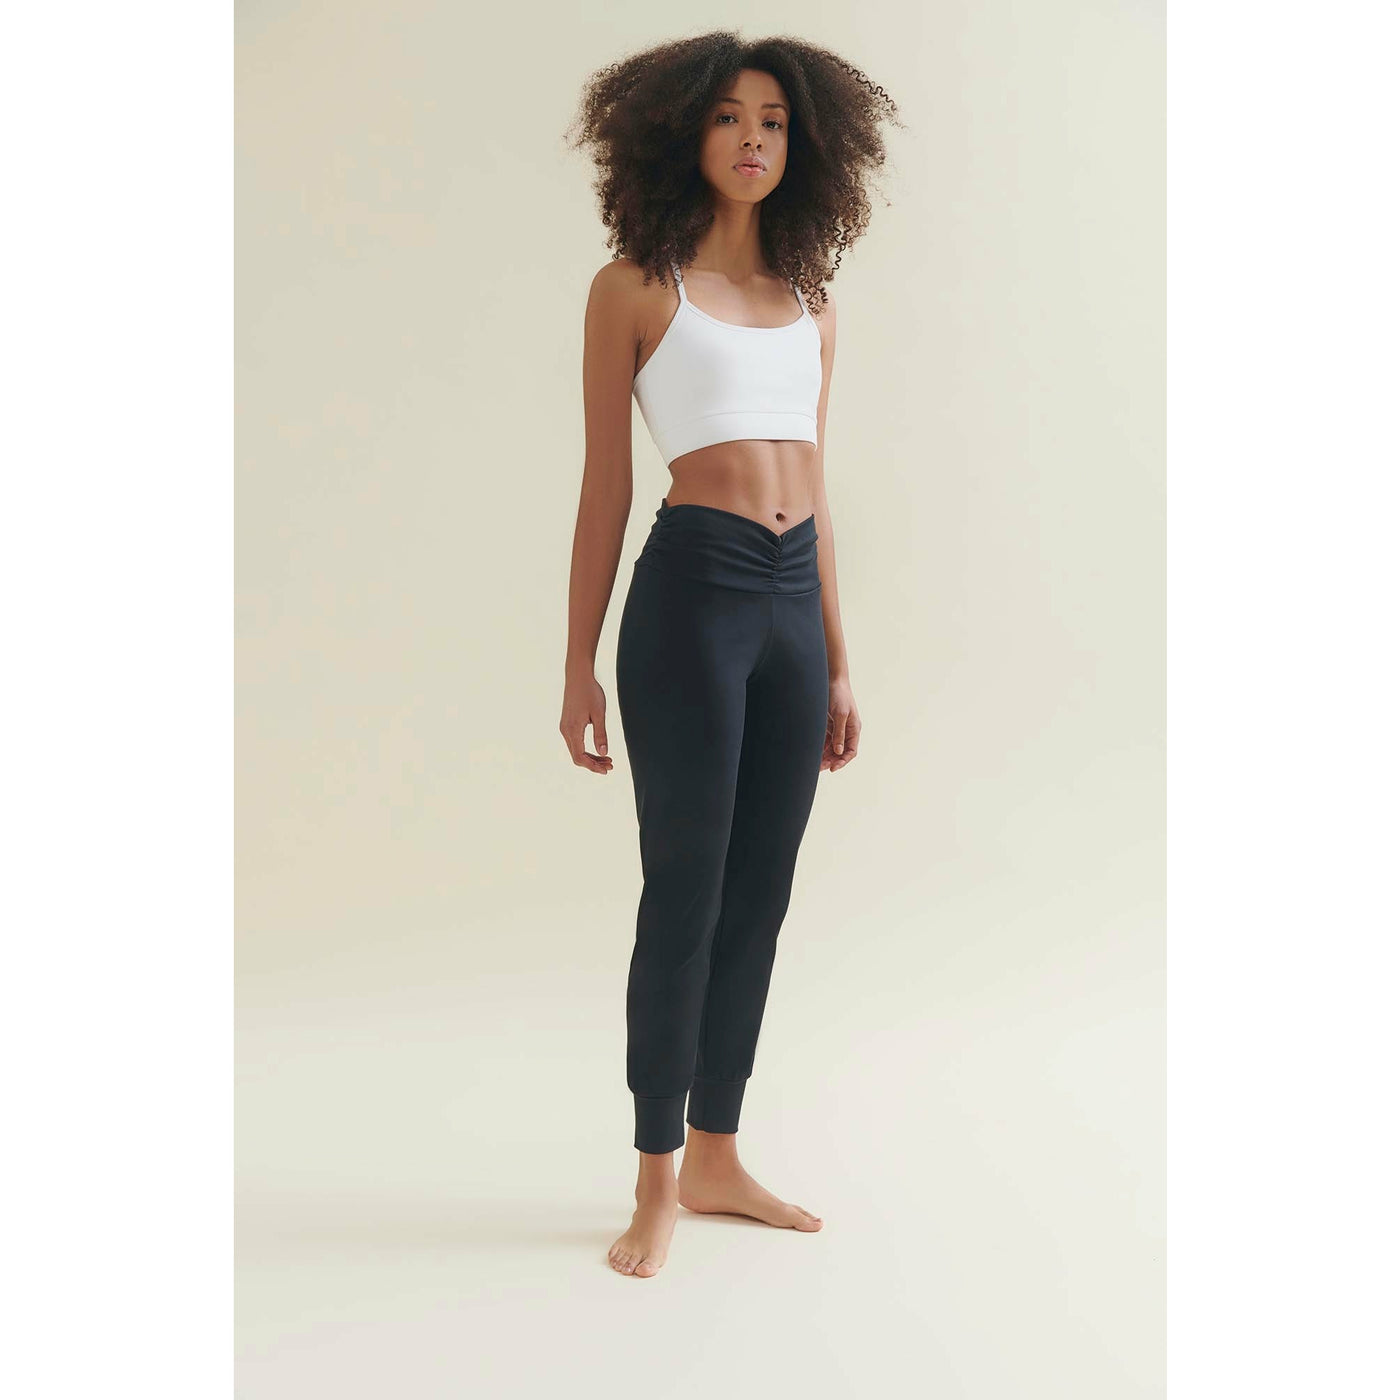 Eco Yoga Leggings High Waste made from biodegradable fabric